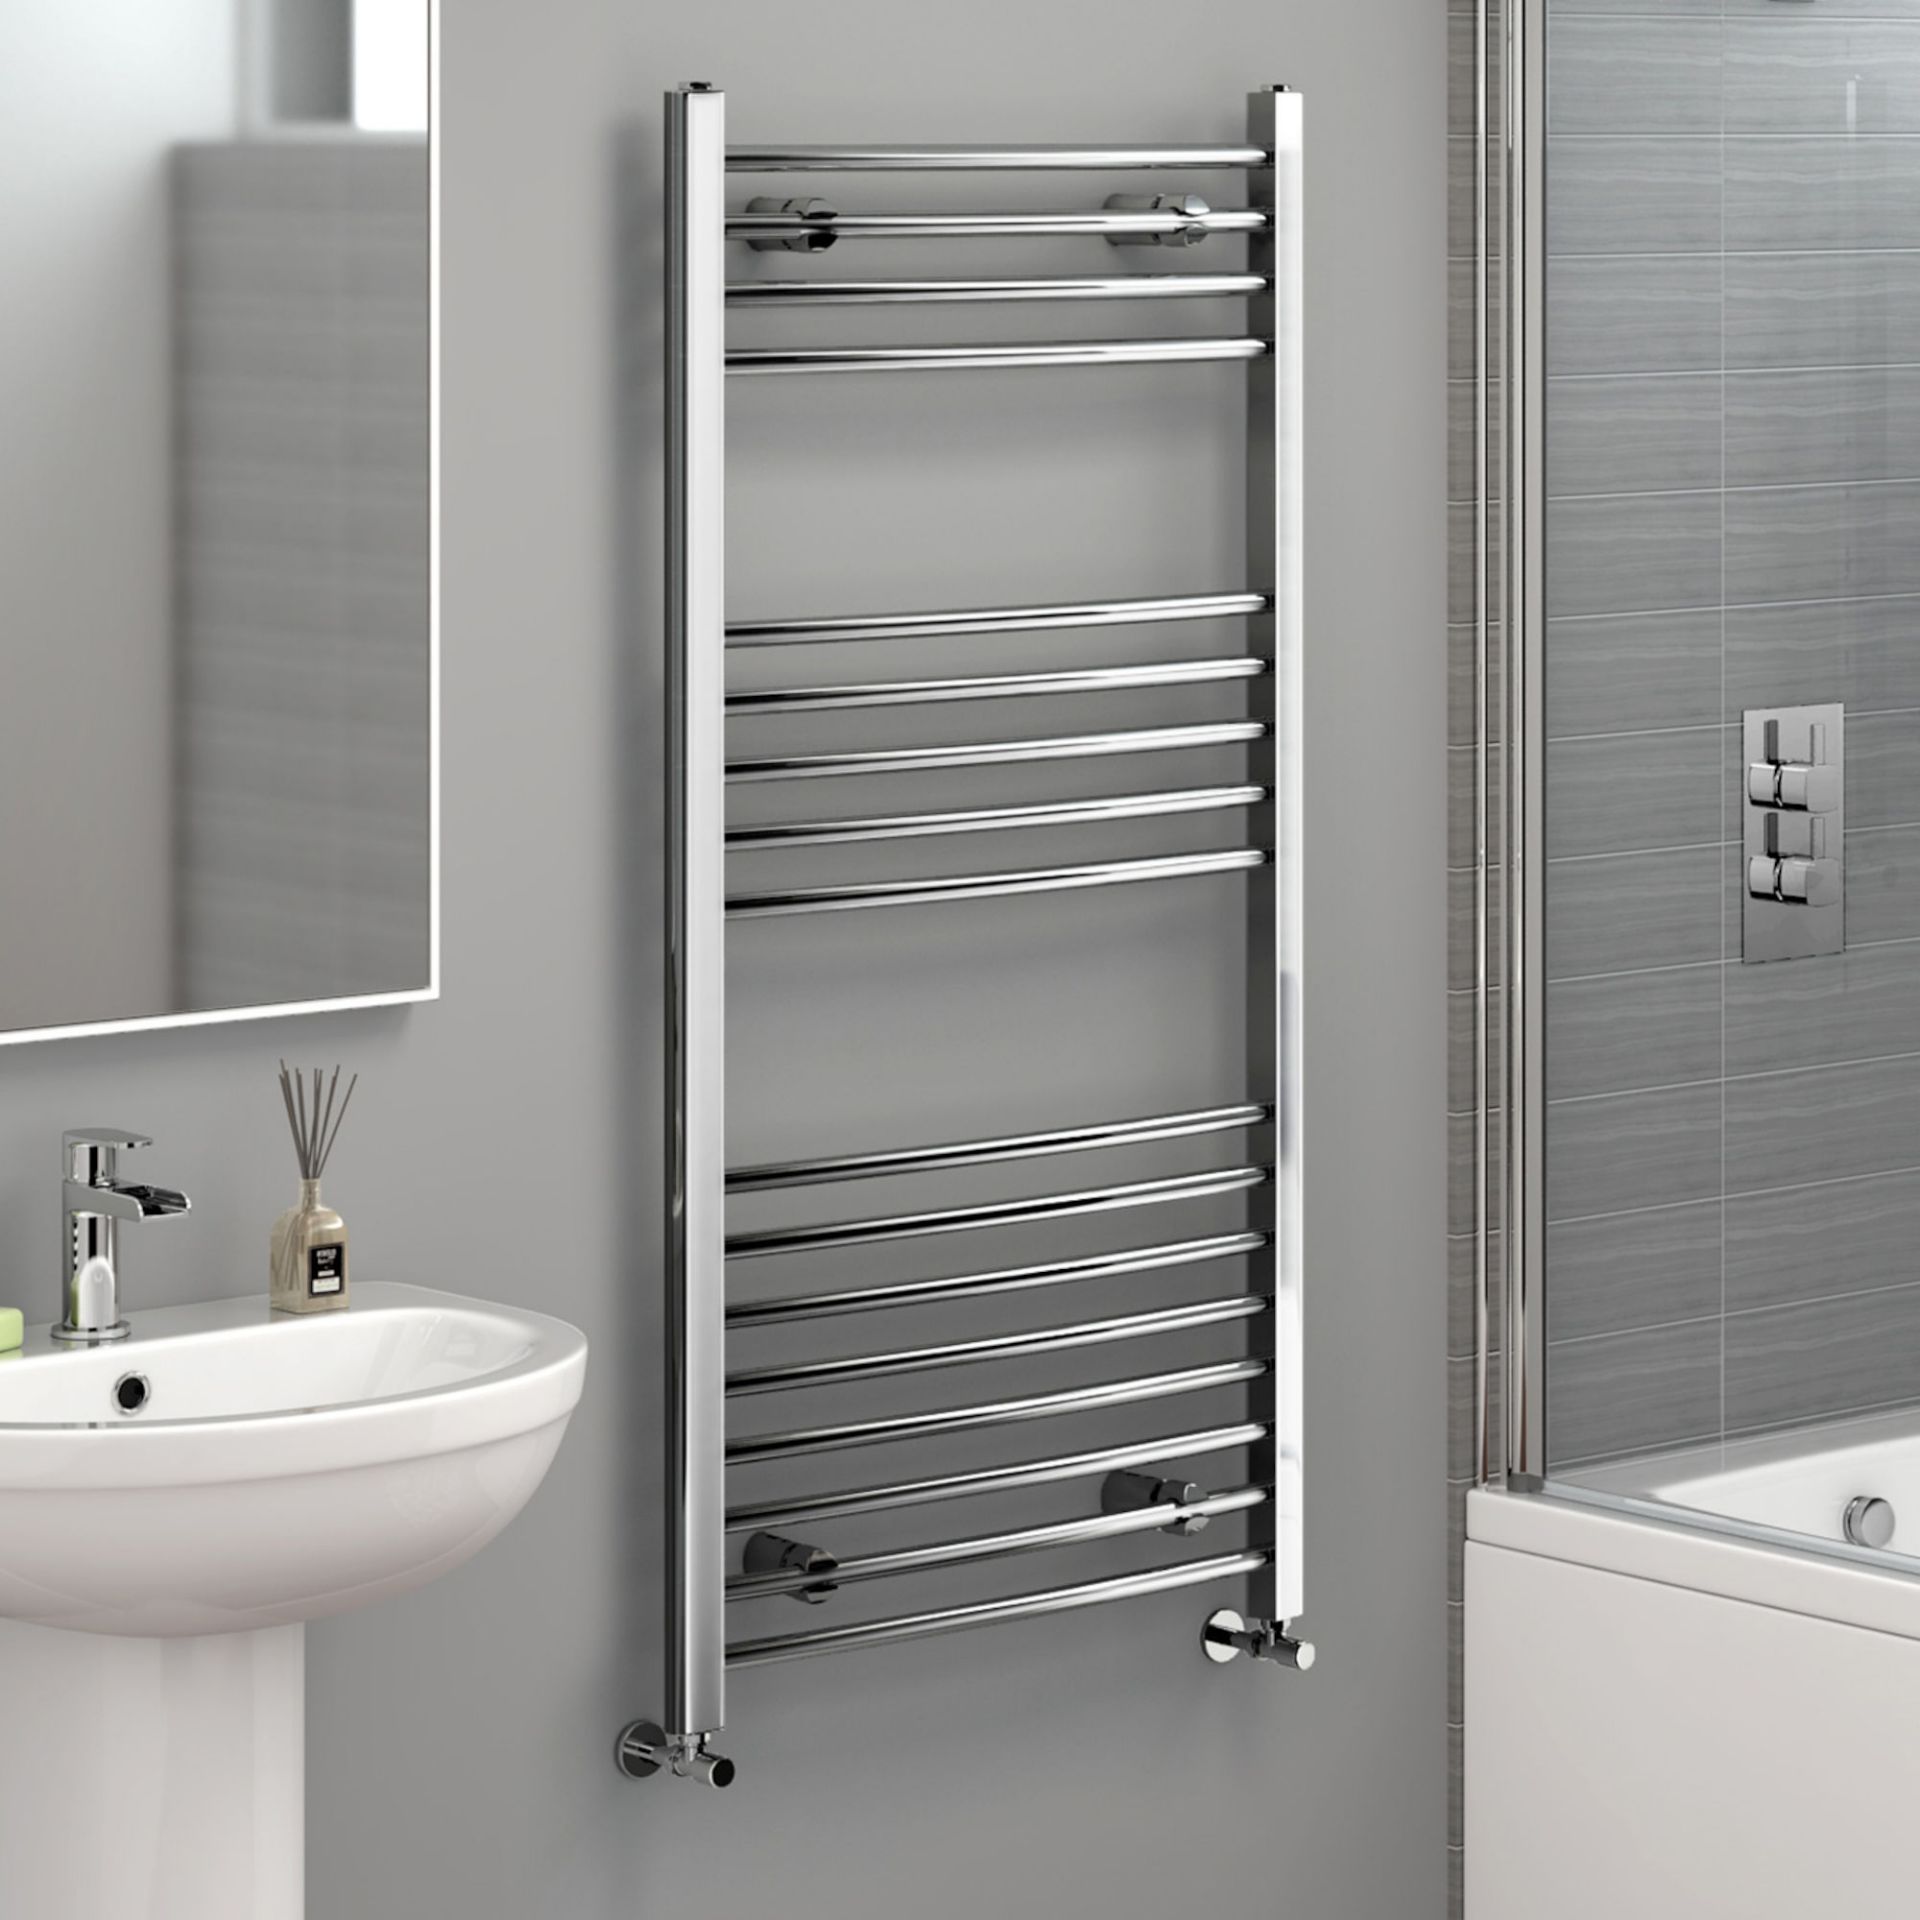 New 1200x600mm - 20mm Tubes - Chrome Curved Rail Ladder Towel Radiator. Nc1200600. Made From Ch...